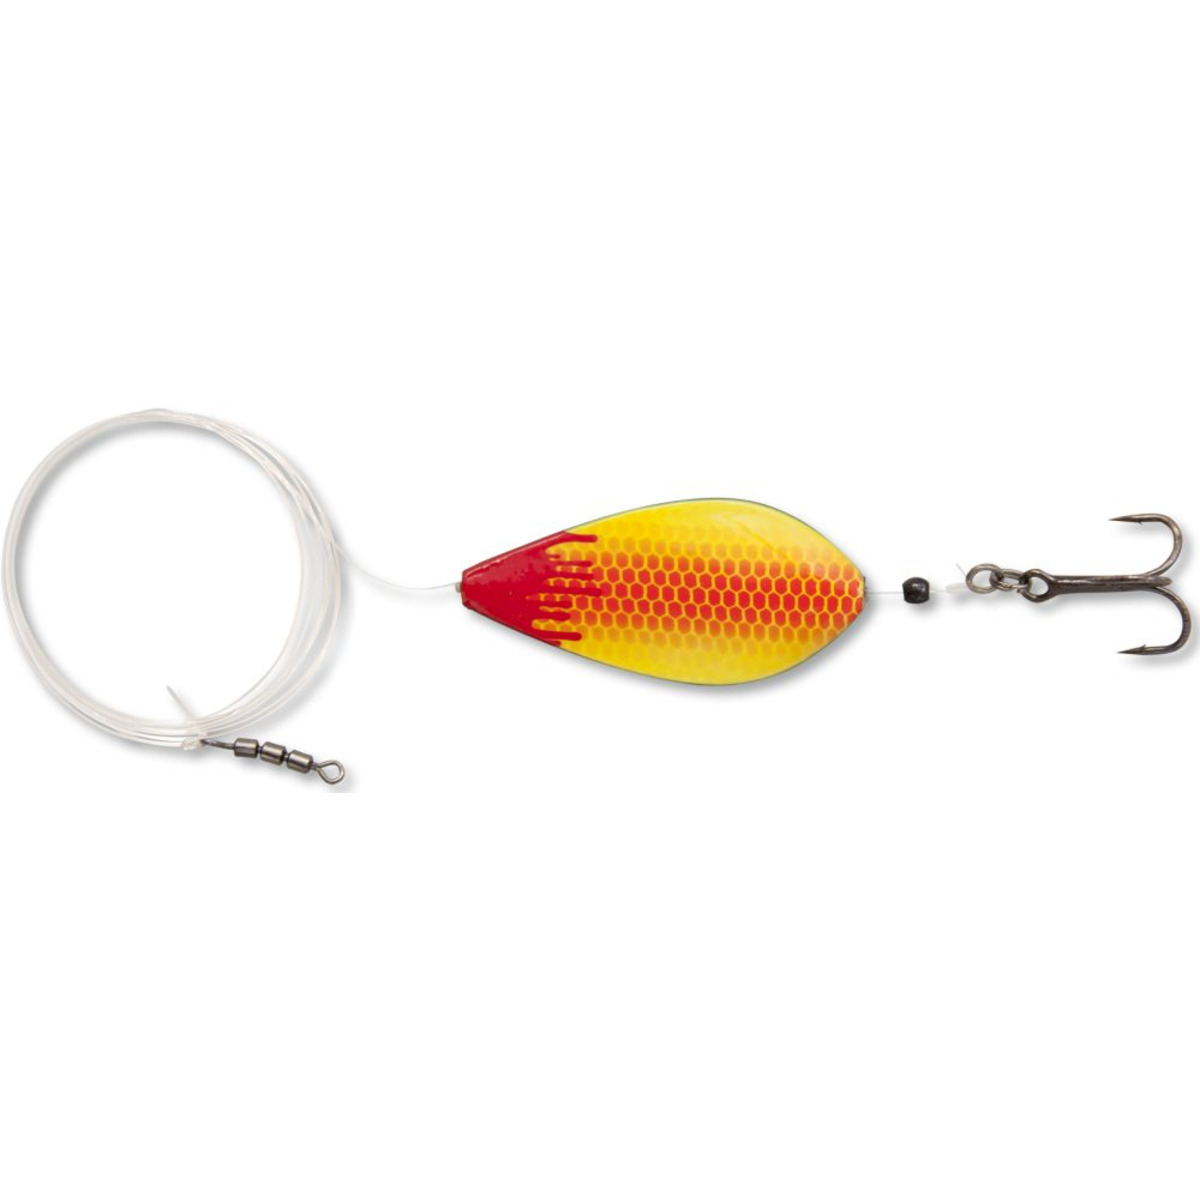 Magic Trout Fat Bloody Inliner - red/yellow